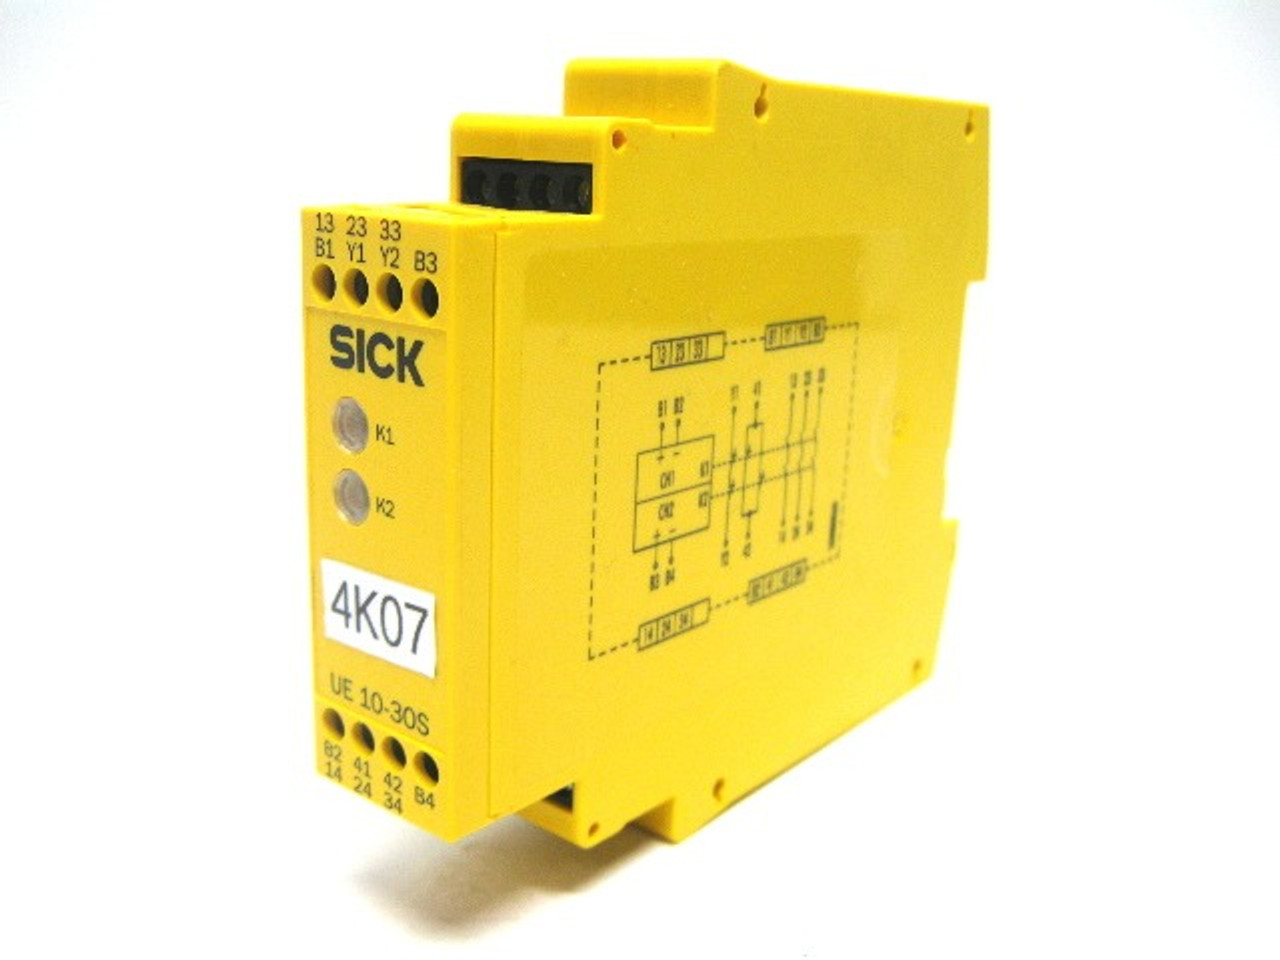 Sick UE10-3OS2D0 Safety Relay 24 Vdc 6024917